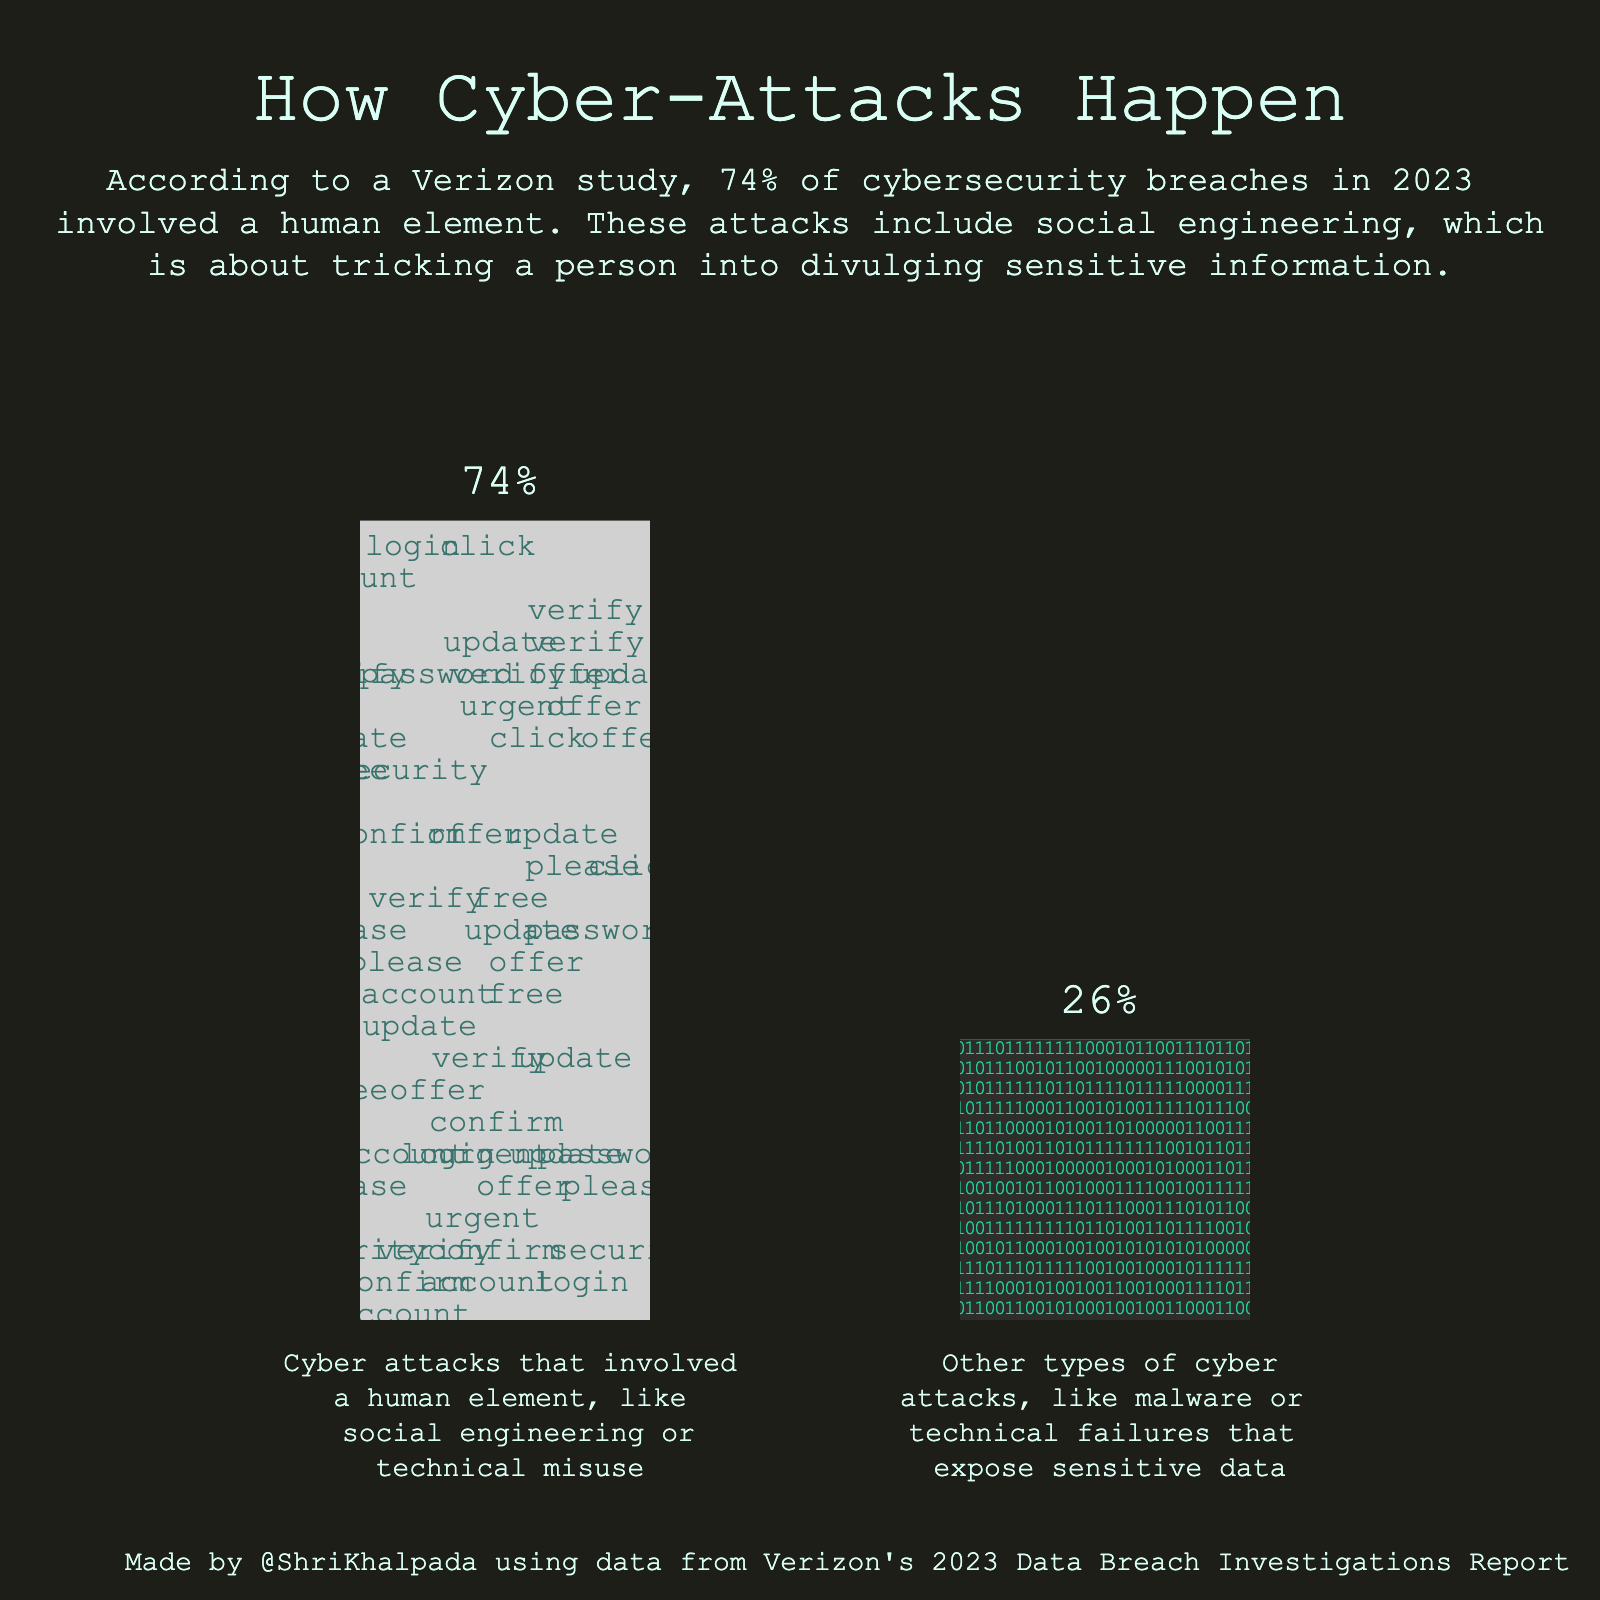 An infographic titled "How Cyber-Attacks Happen," with two large percentages, 74% and 26%, and text explaining that the majority of cyber-attacks involve a human element like social engineering.